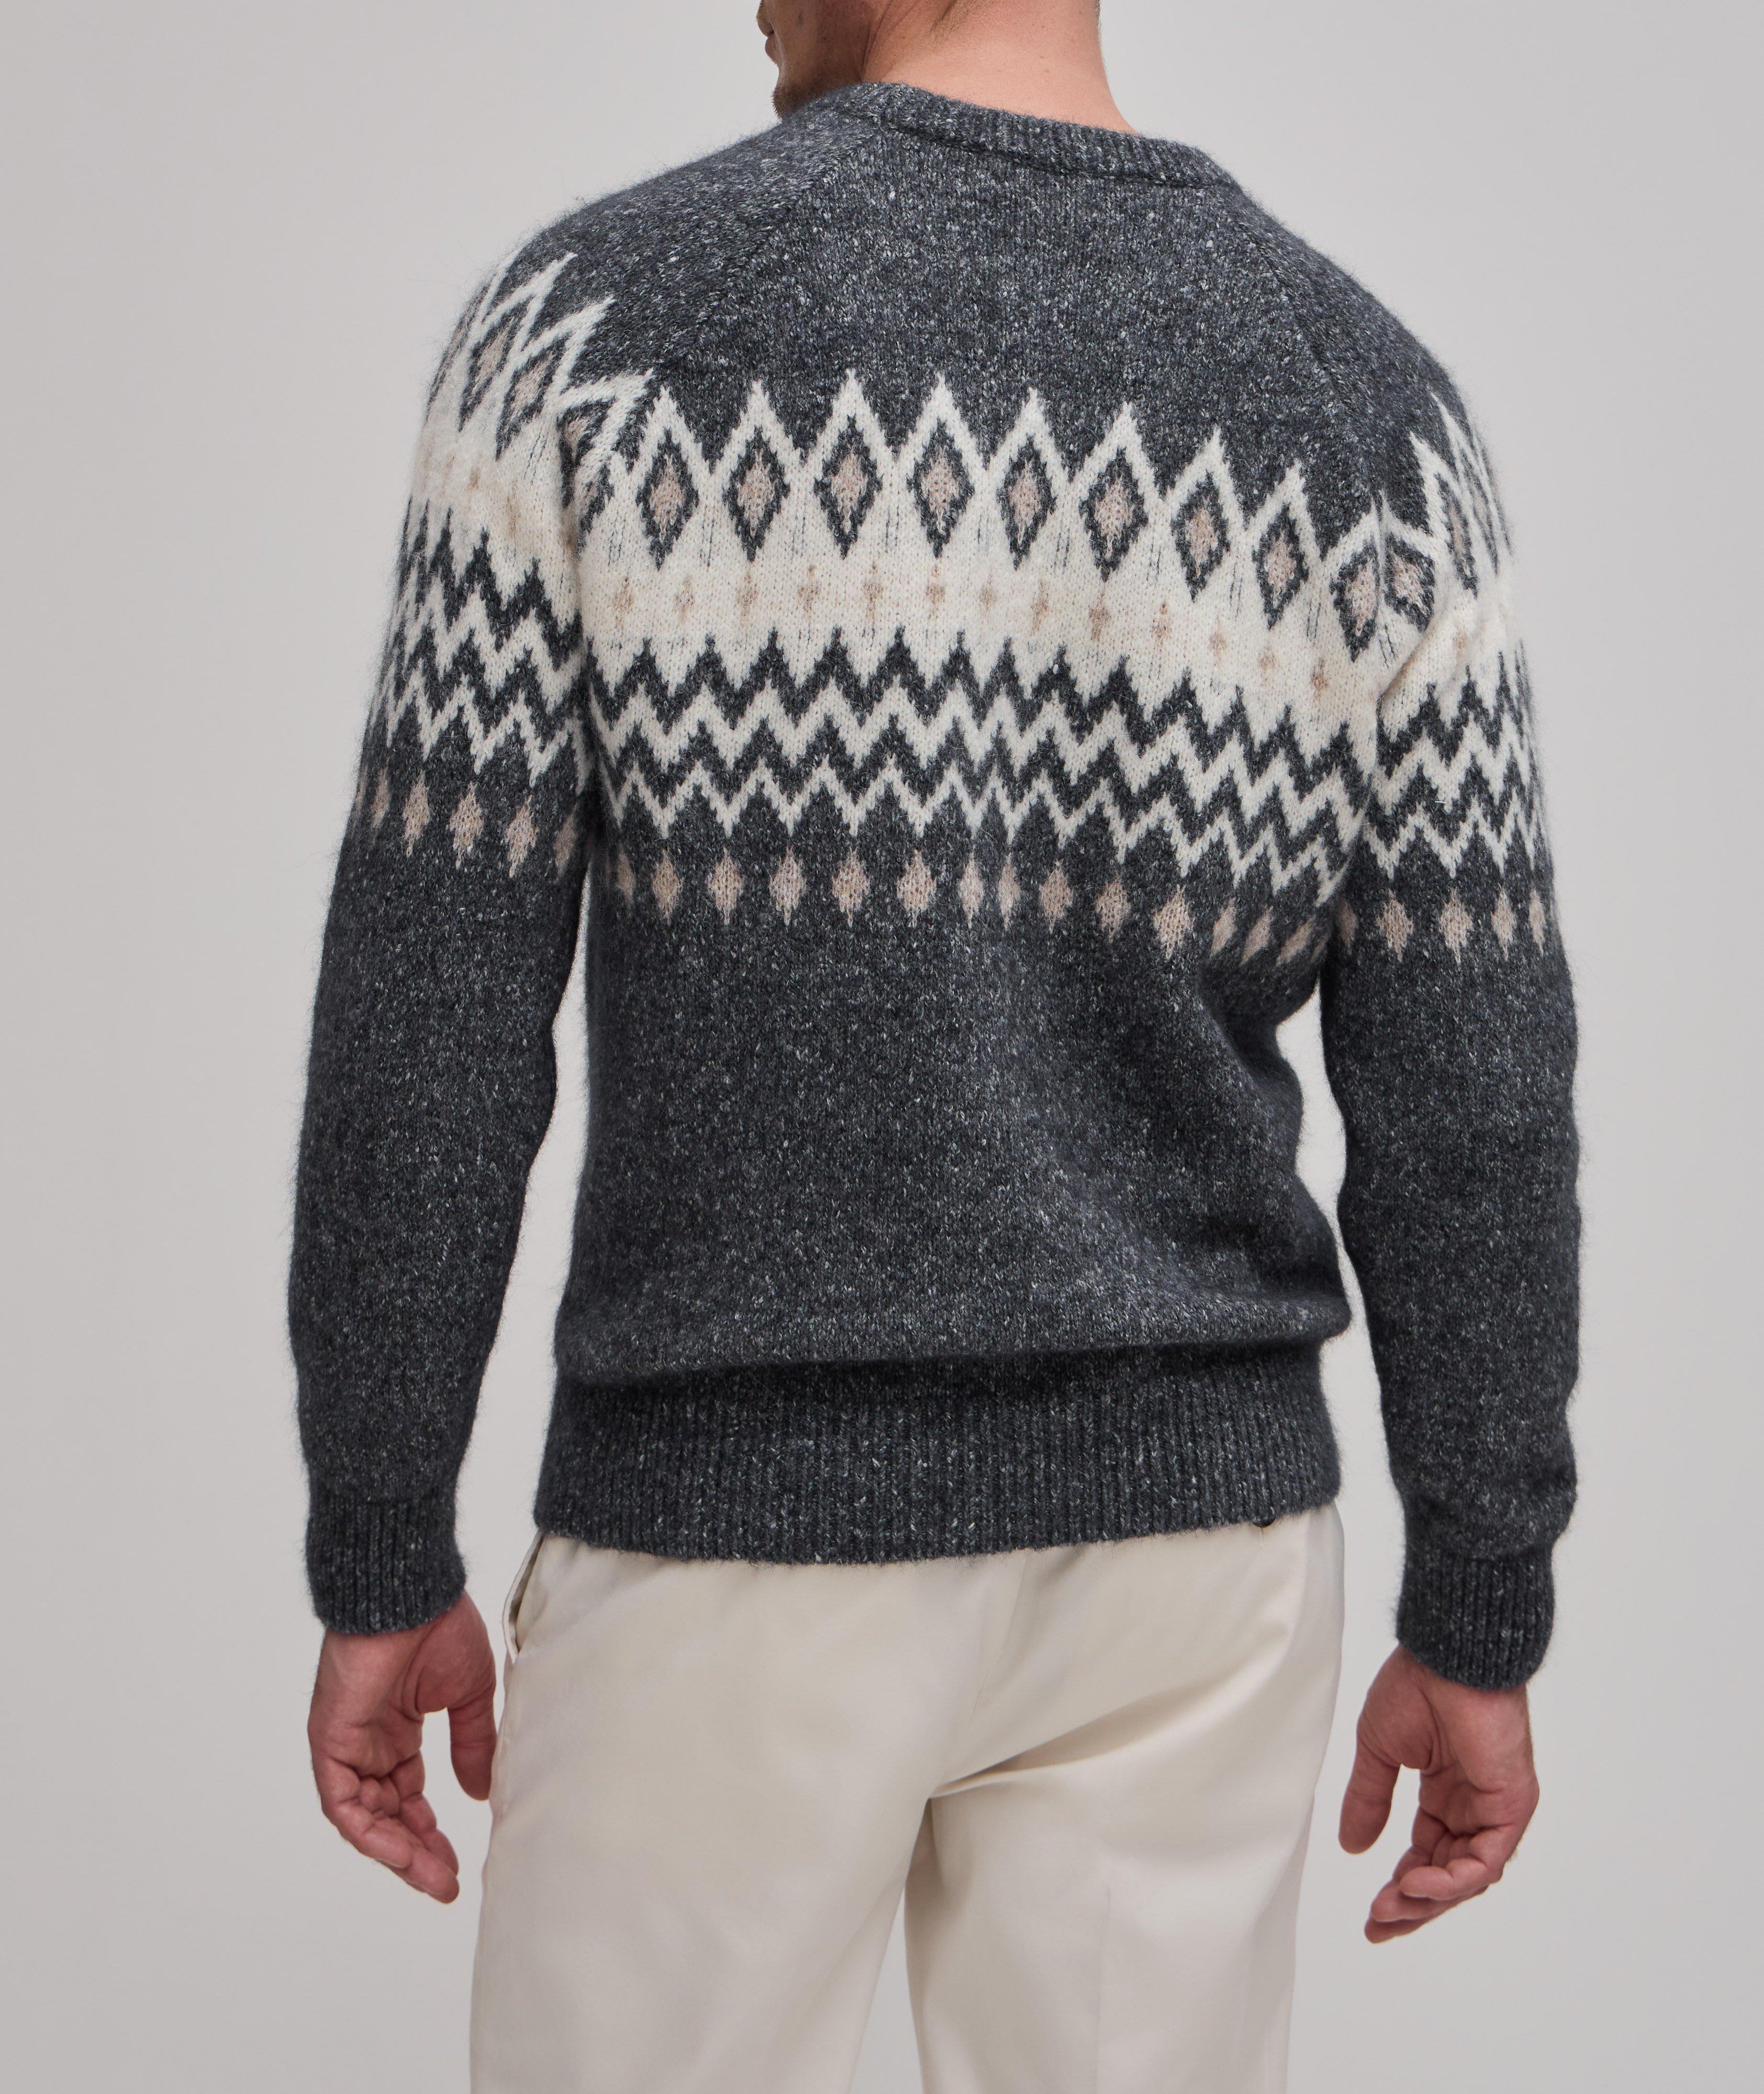 Cashmere Collection Fair Isle Sweater image 2